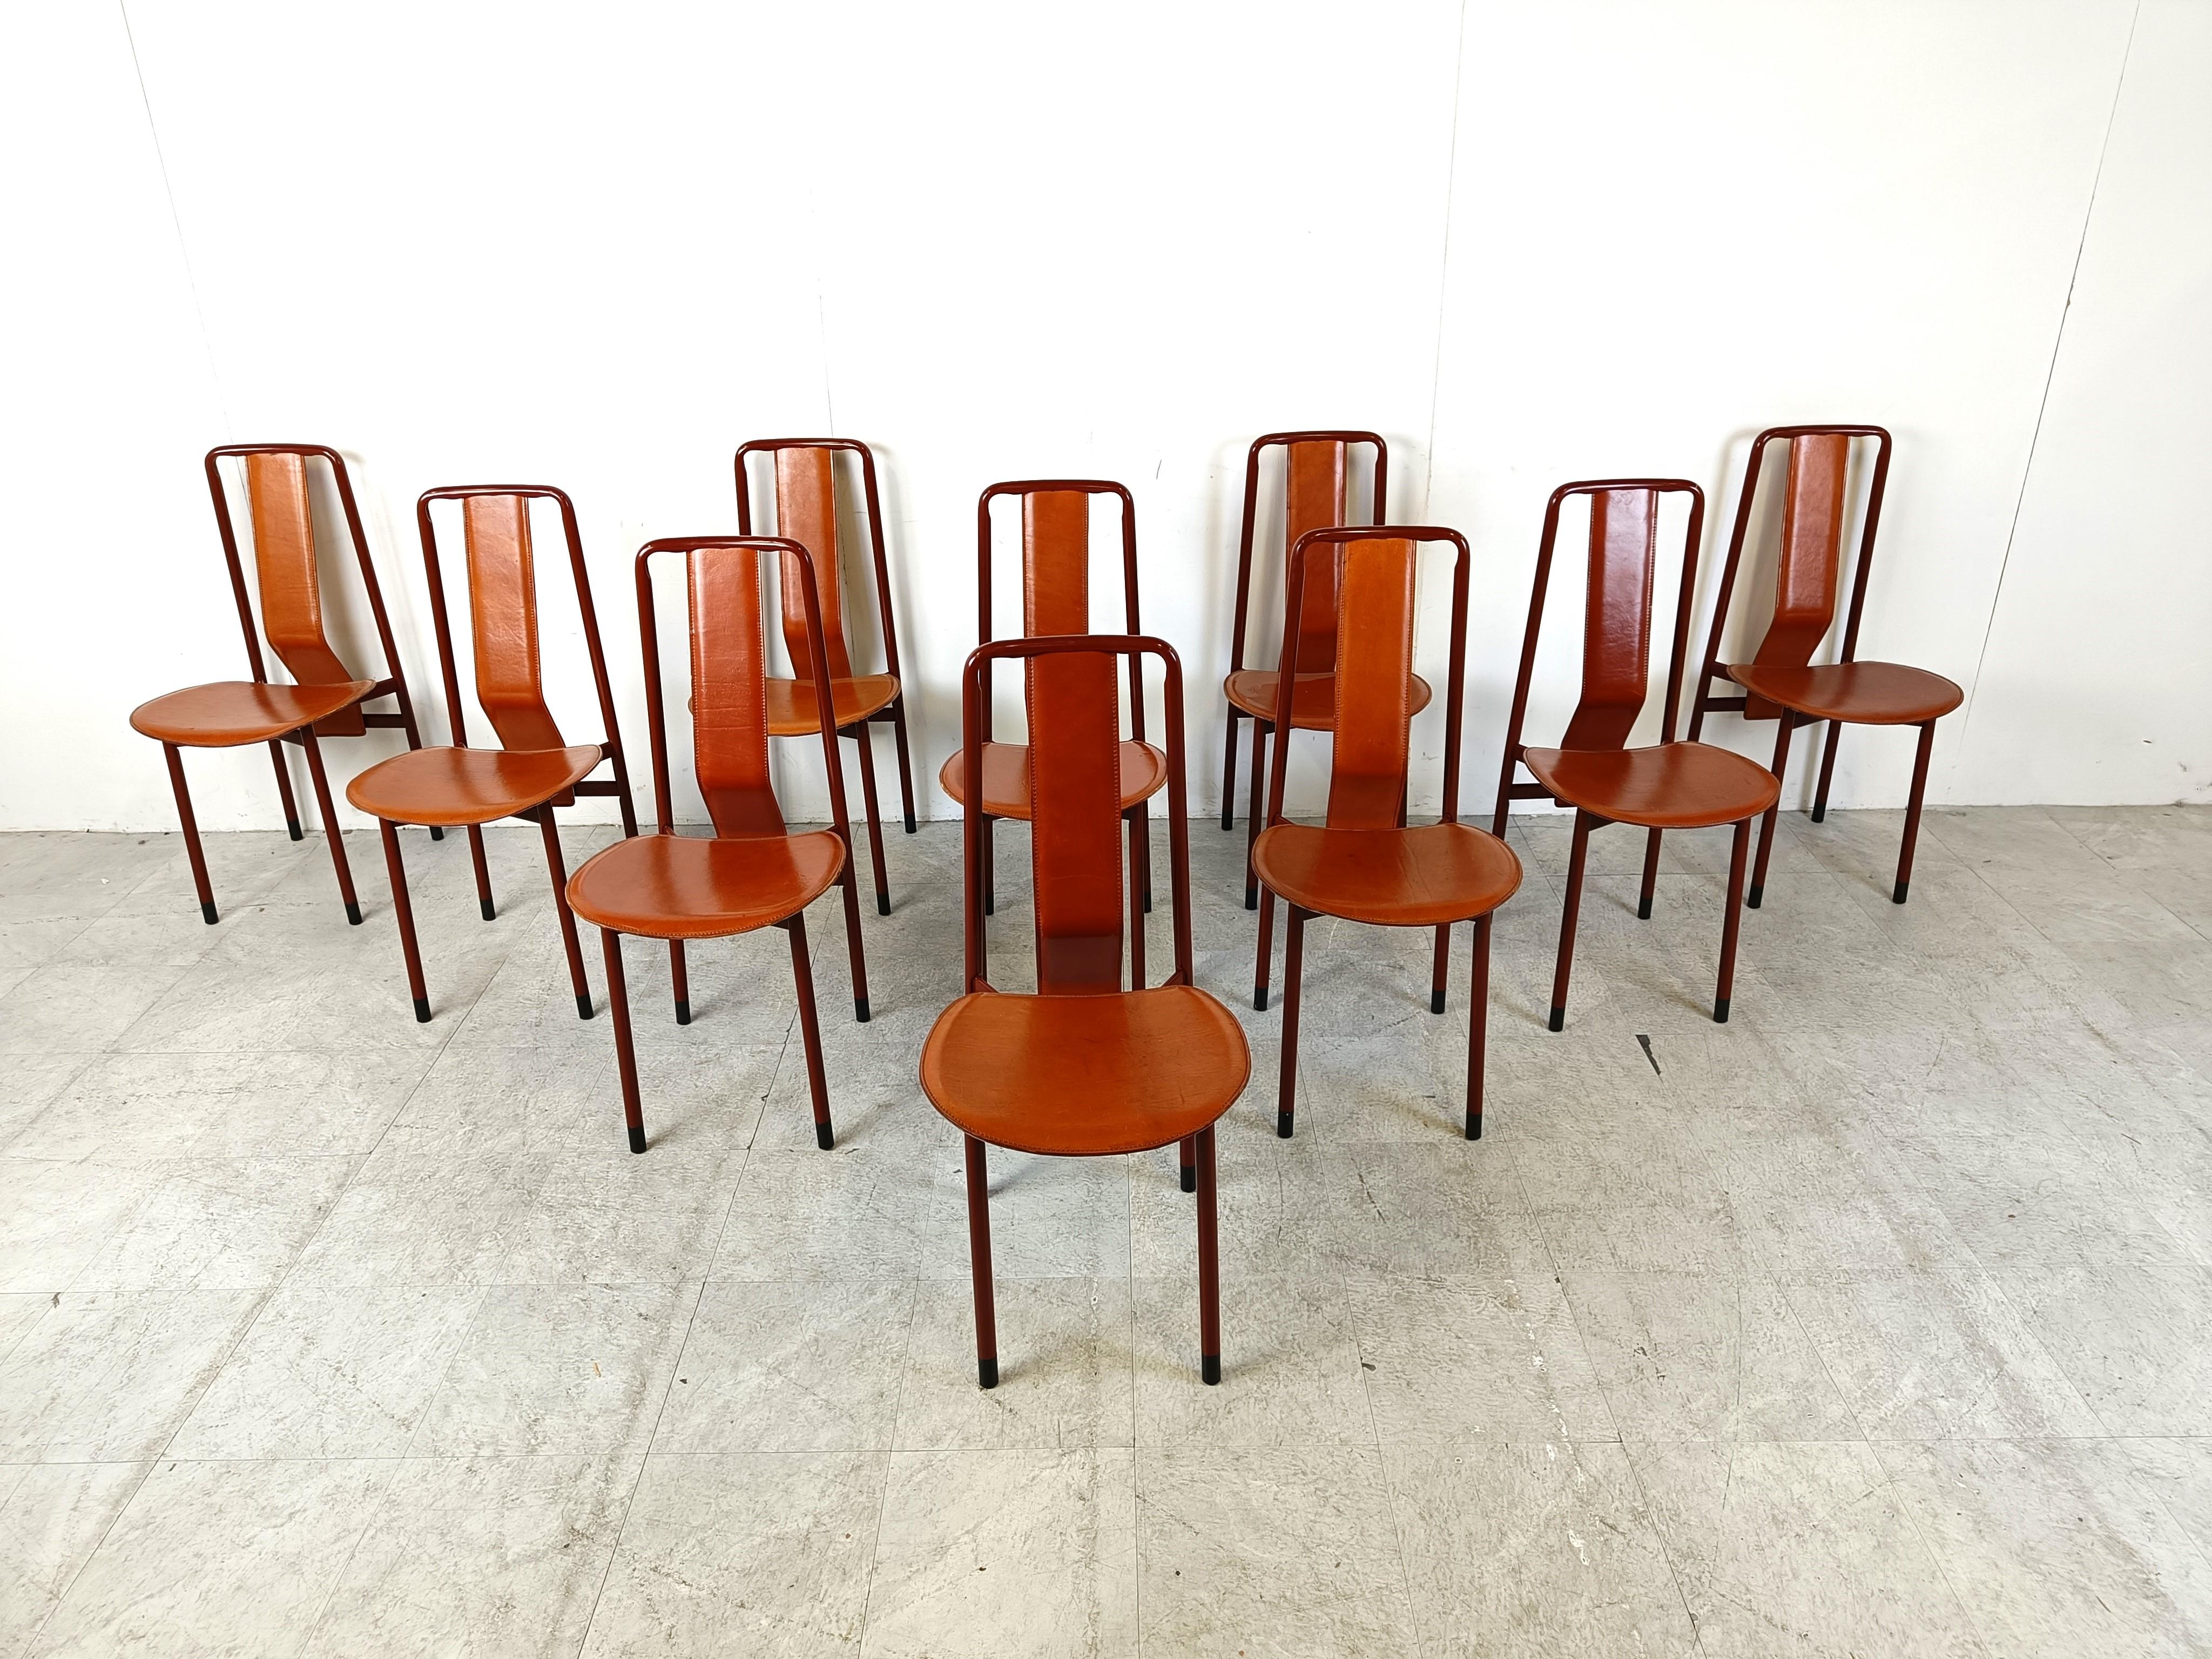 Vintage design dining chairs designed by Achille Castiglioni for Zanotta model Irma.

Red lacquered metal frames with leather seats and backrests. 

In good condition with normal age related wear. 

No rips or scratches in the leather.

1970s -